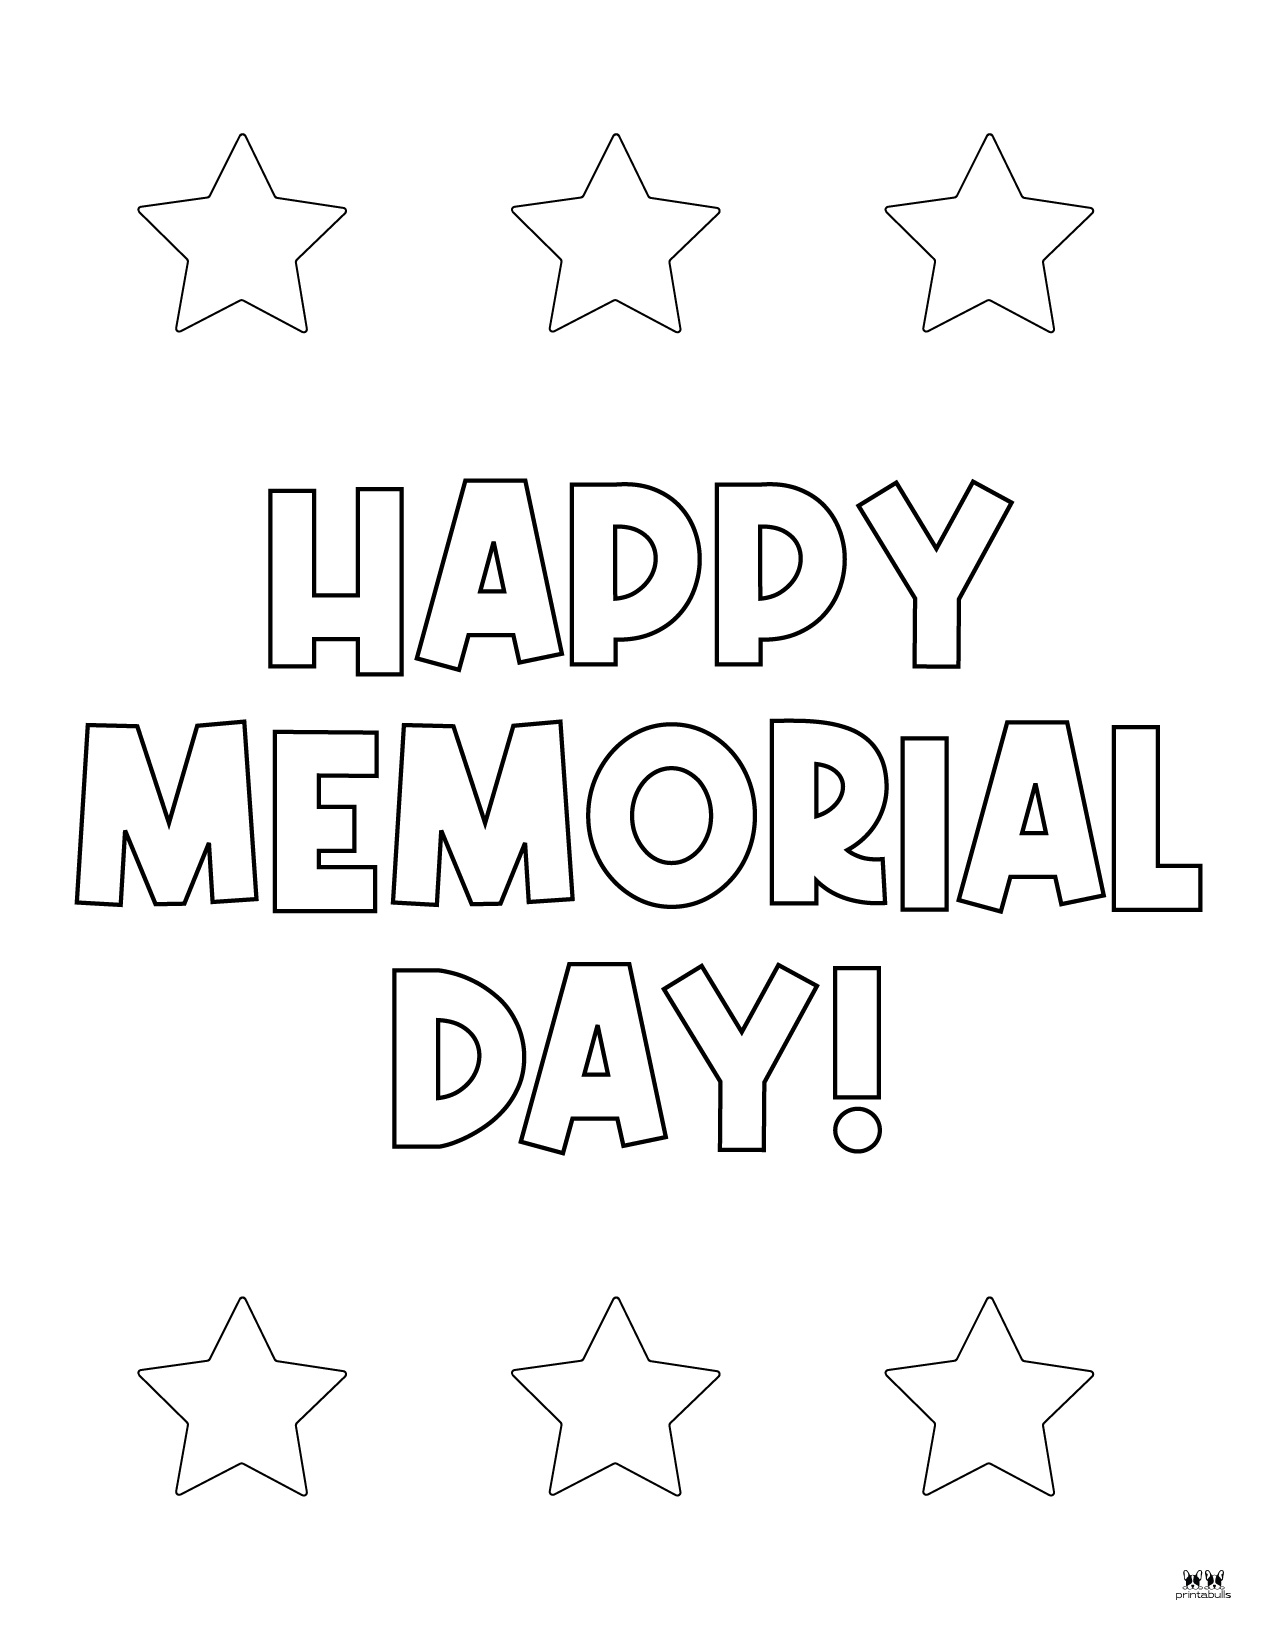 memorial-day-coloring-pages-15-free-pages-printabulls